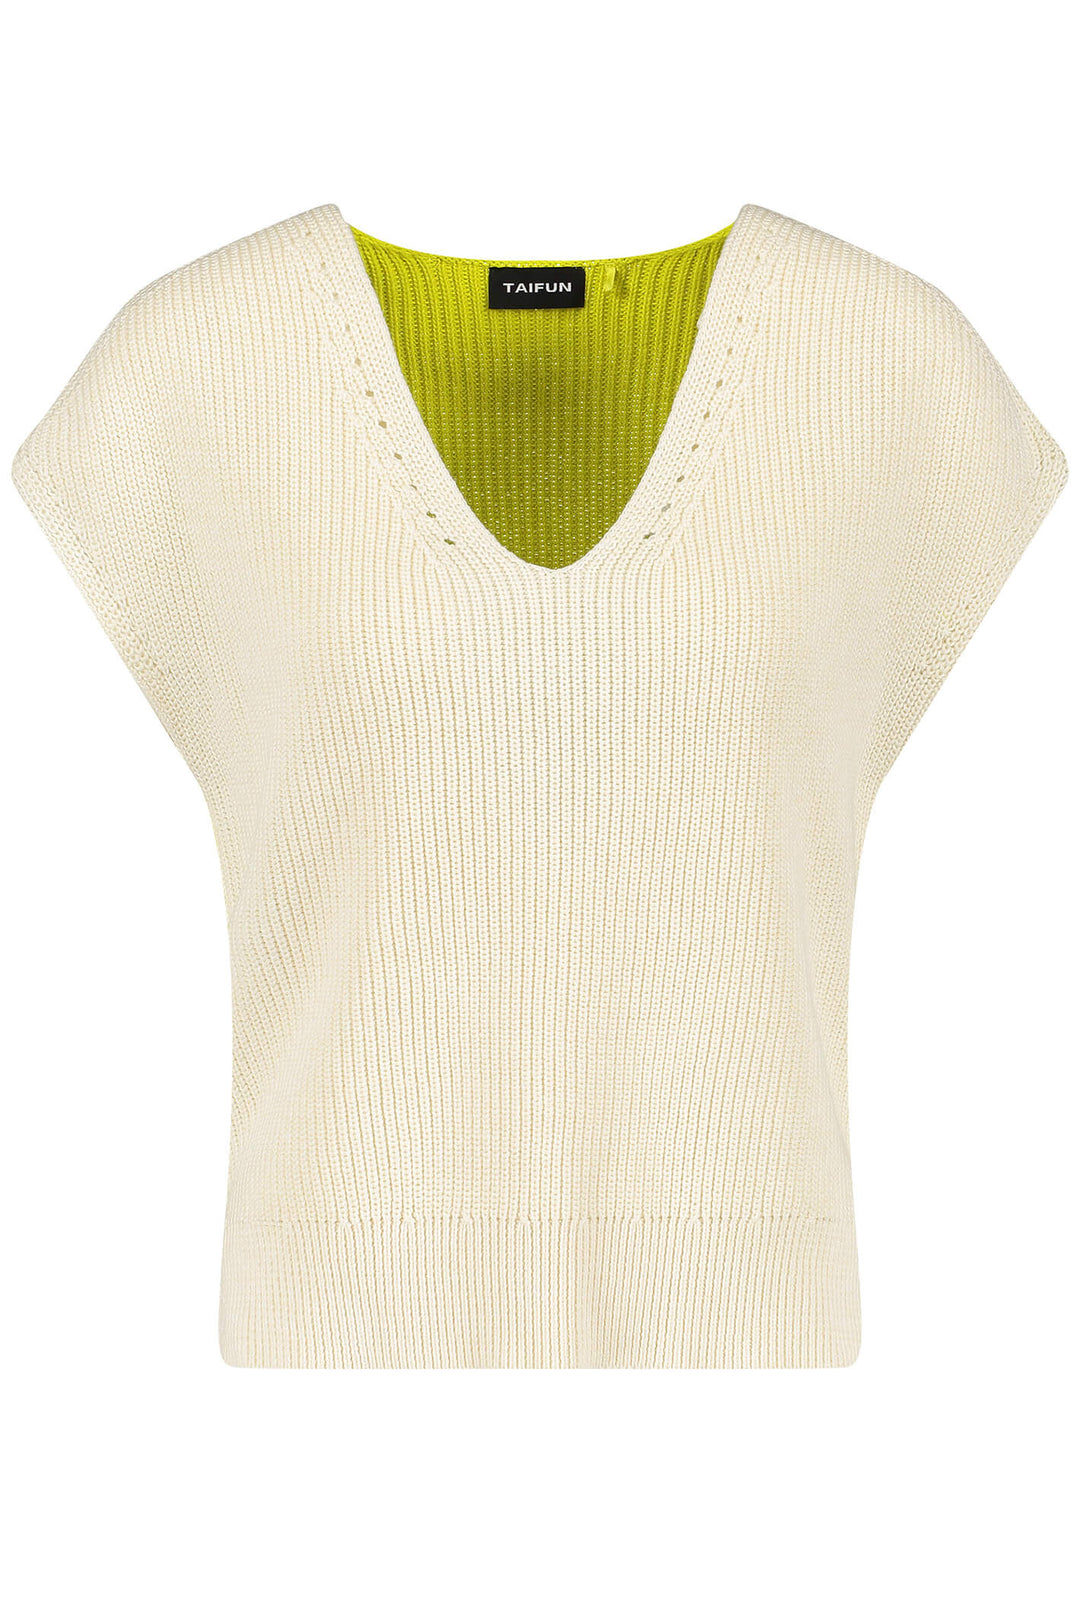 Taifun 372309 Light Creme & Lime V-Neck Jumper - Experience Boutique